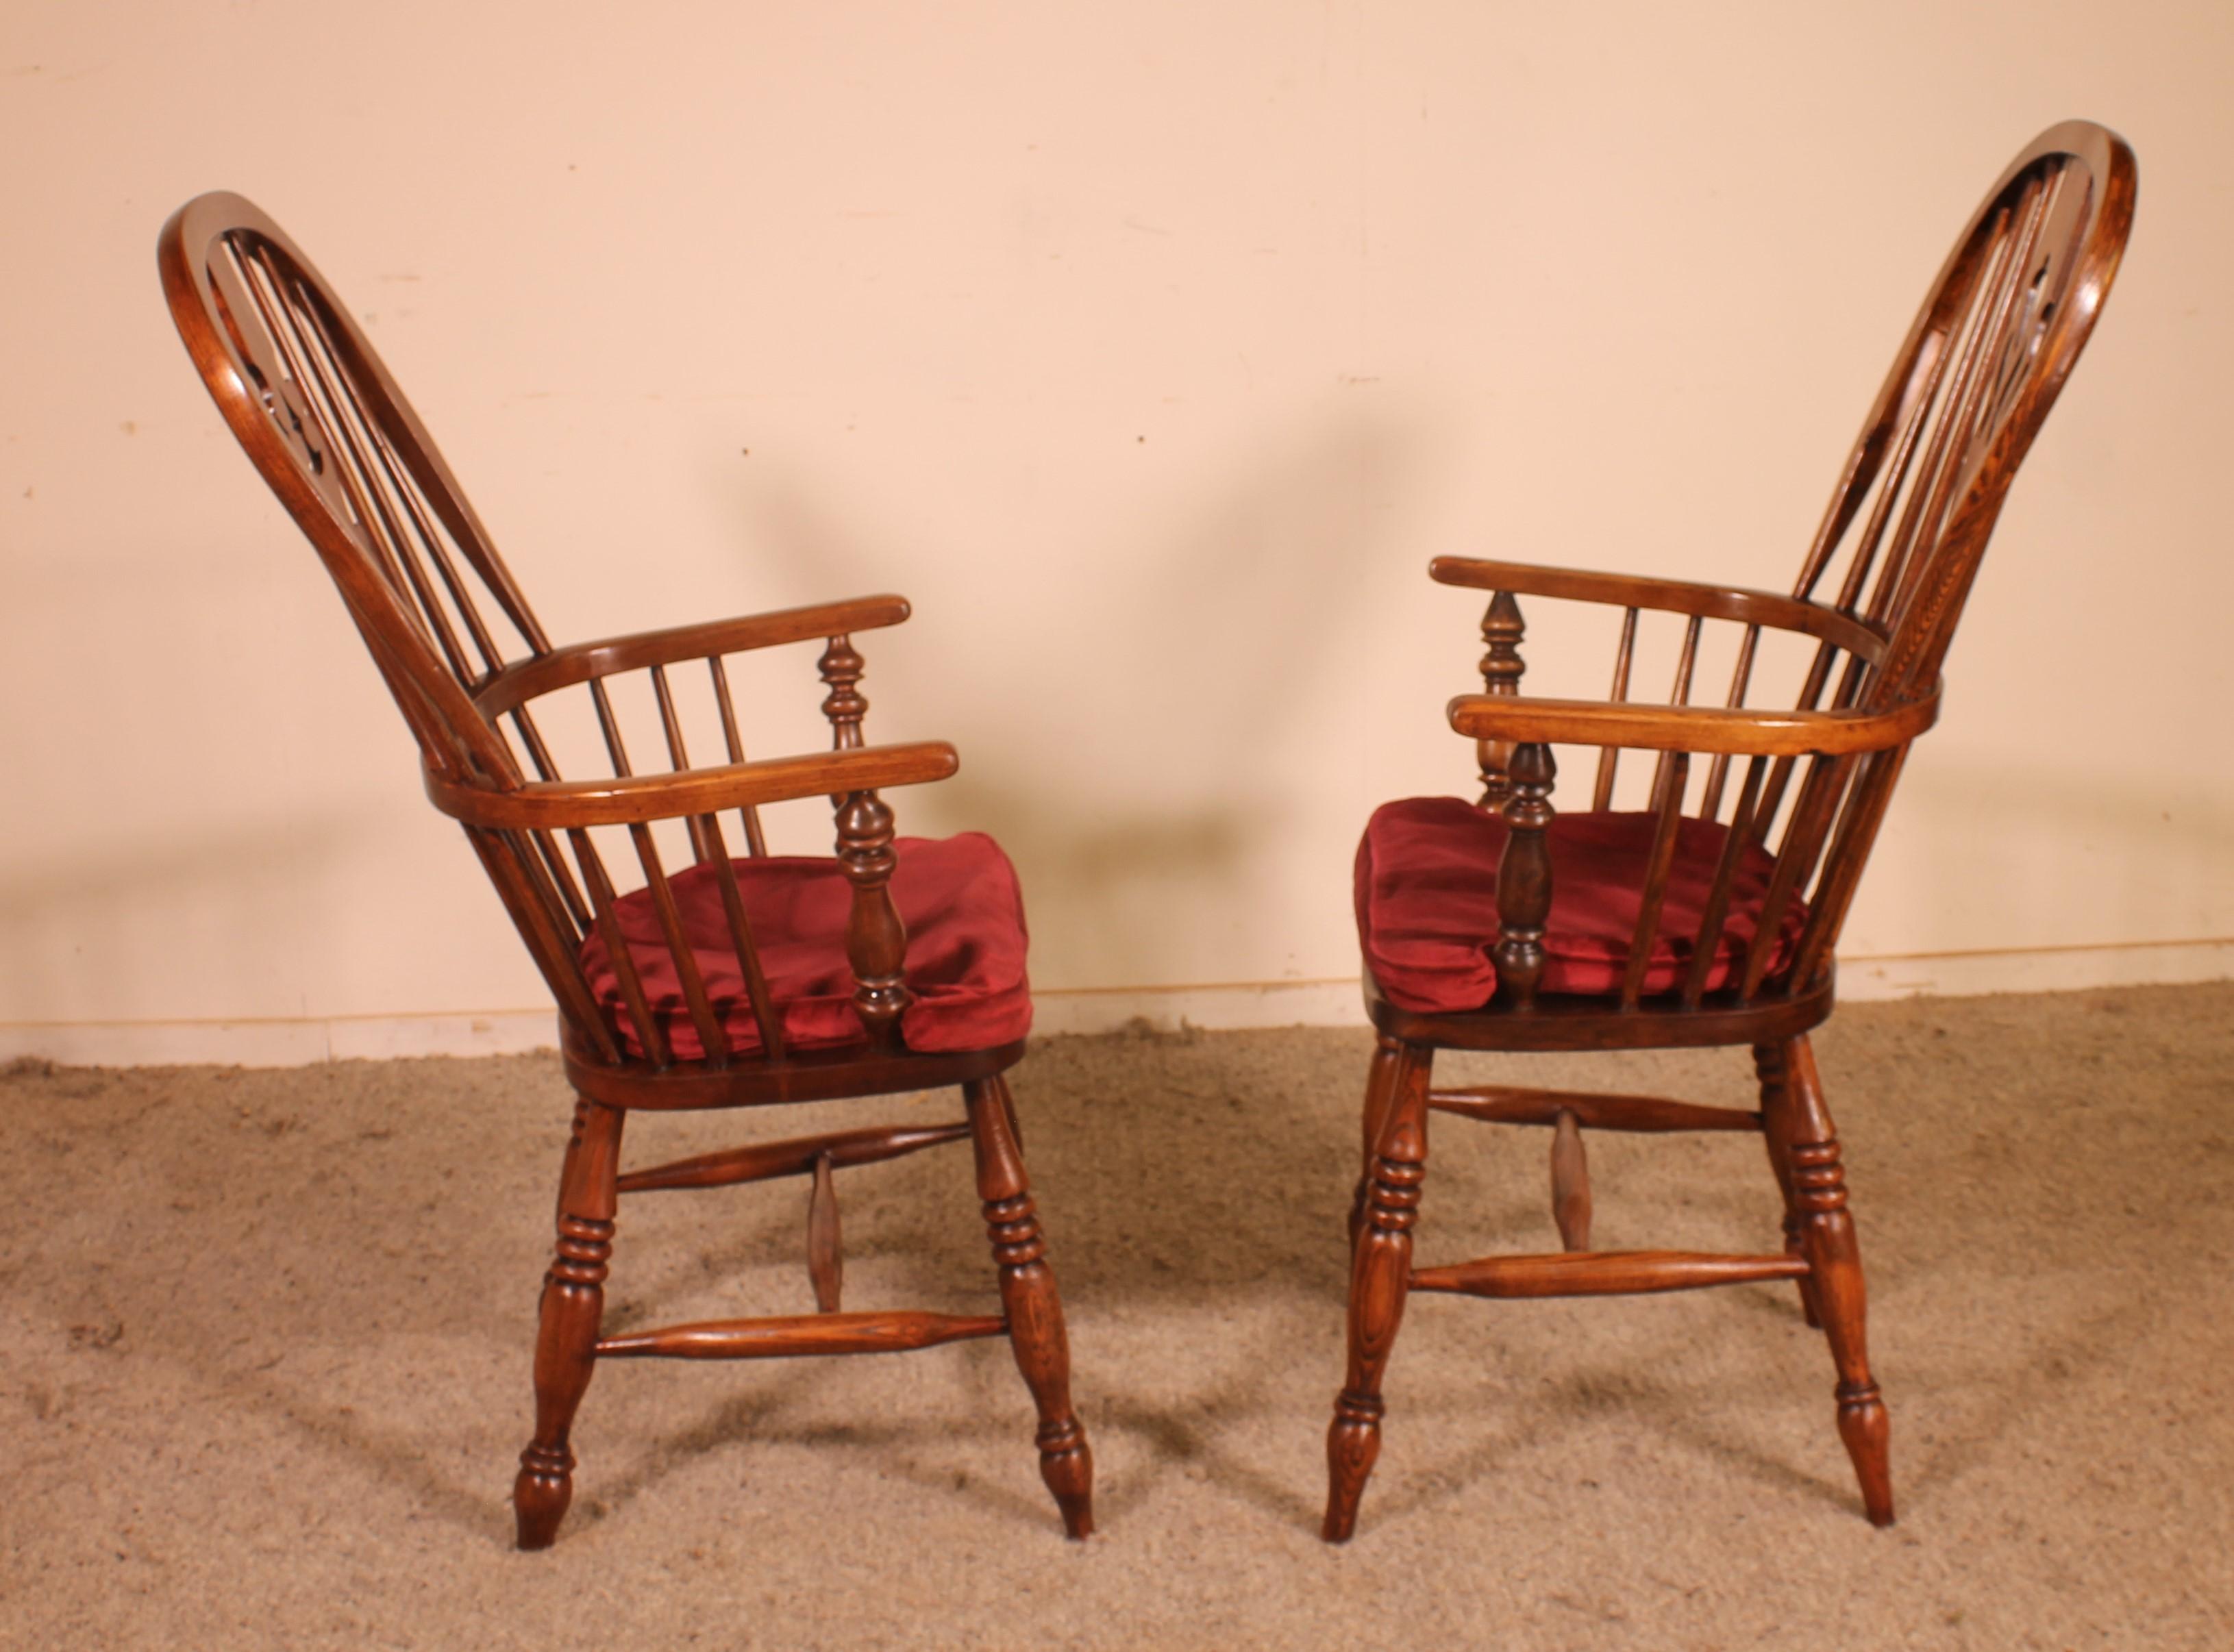 A fine near pair of English windsor armchair from the 19th century in chestnut
Very beautiful armchair of good quality and which has an elegant base and back
Very beautiful patina and in very good condition
The two armchairs have red velvet